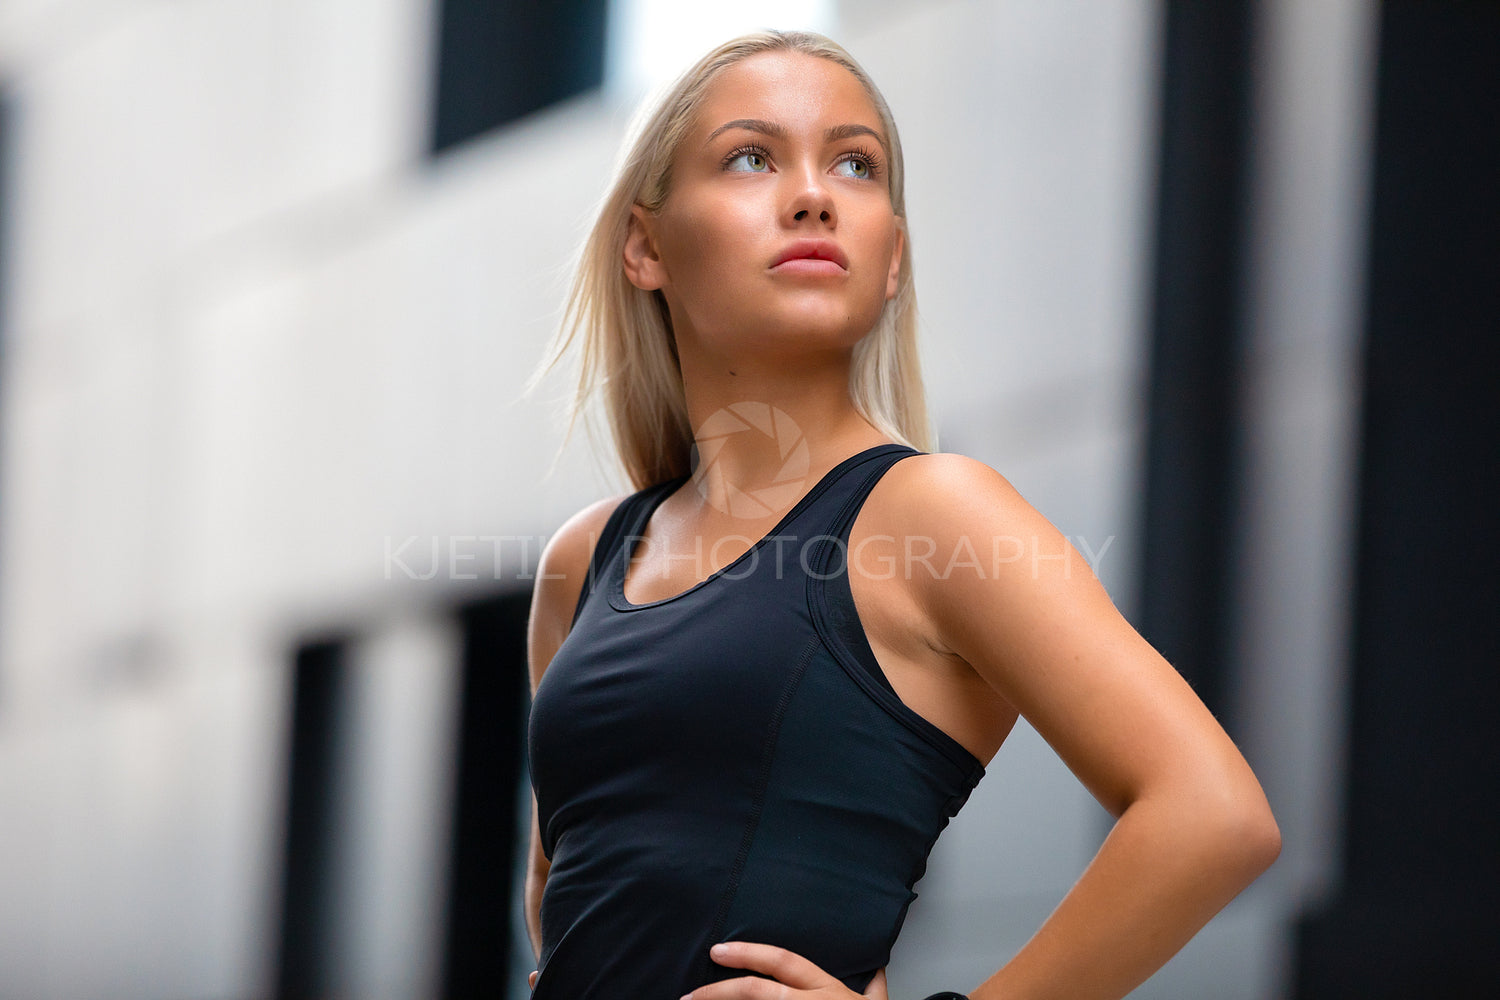 Portrati of confident Fitness Woman in Workout Outfit Standing in City